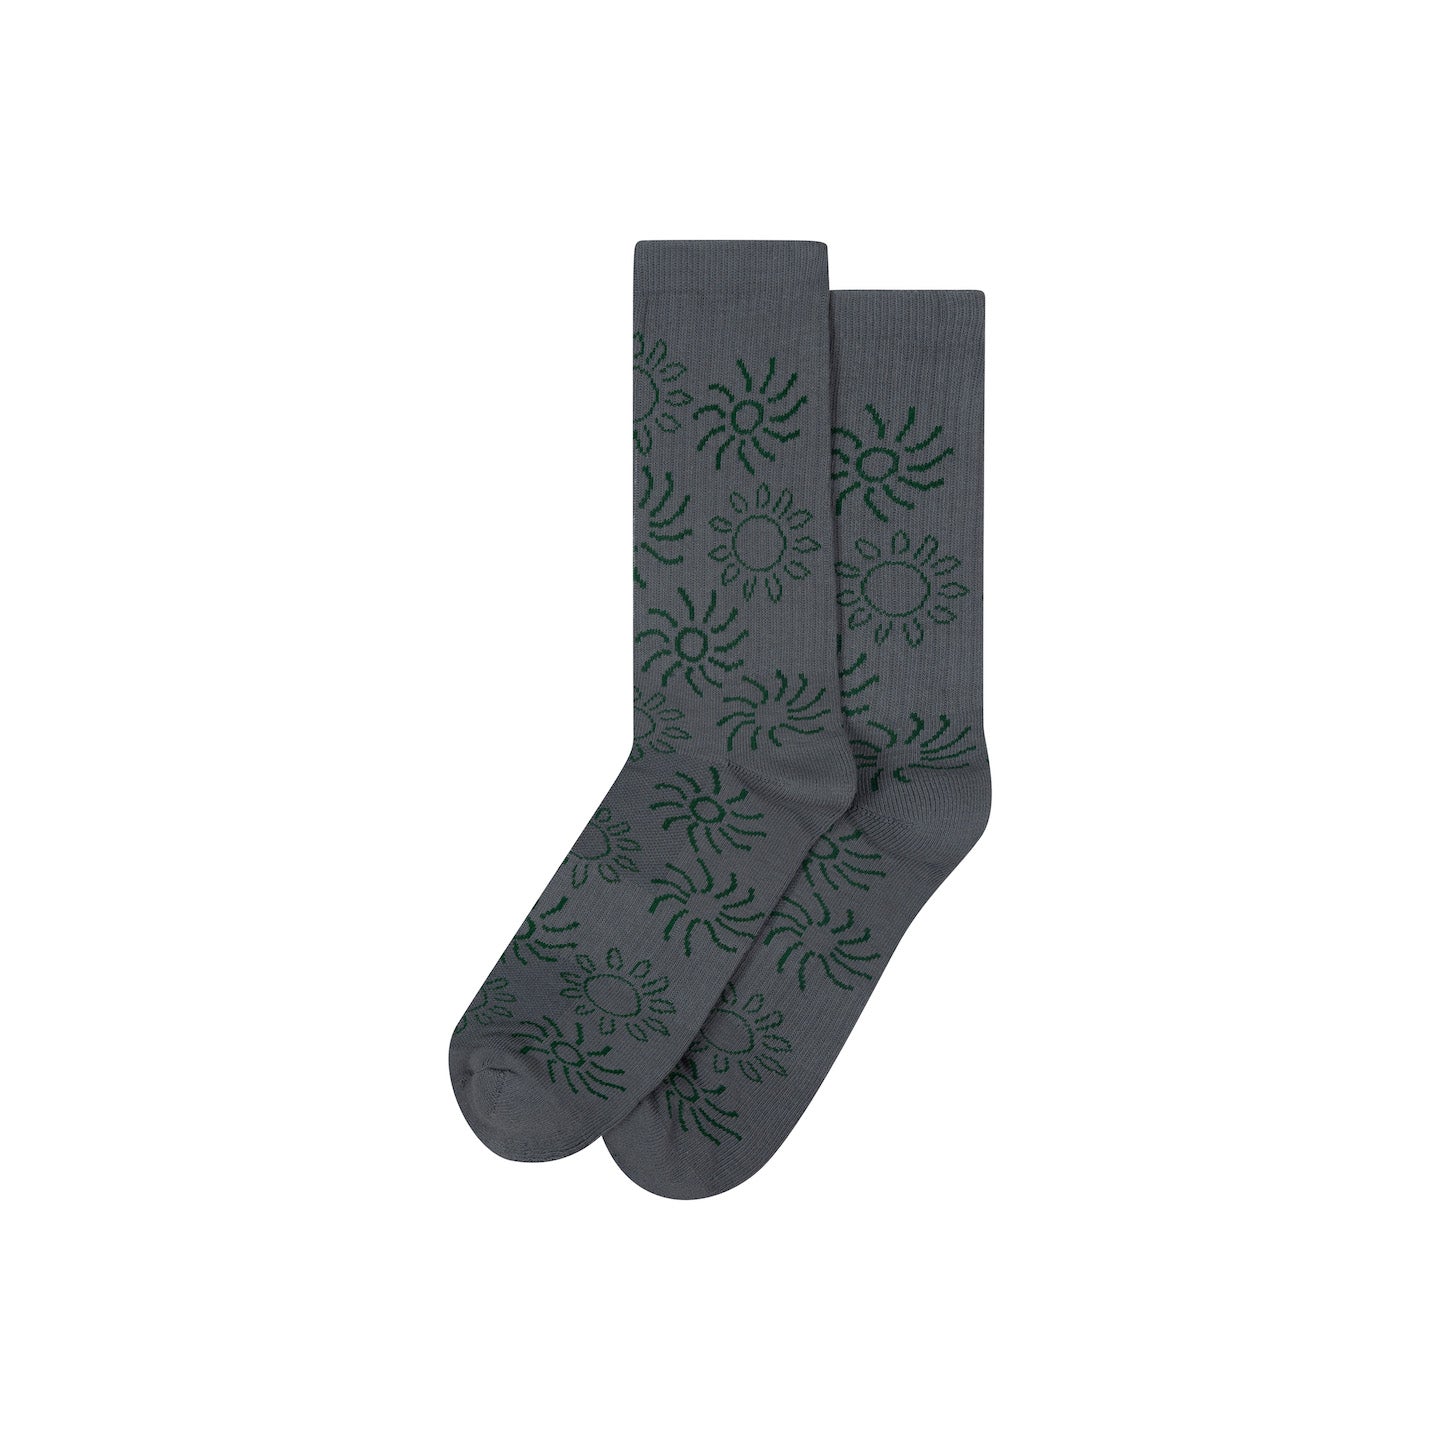 Mosaic Cotton Socks in Dark Grey by Her Kai And I. It features a mulit-sun print design in Forest Green